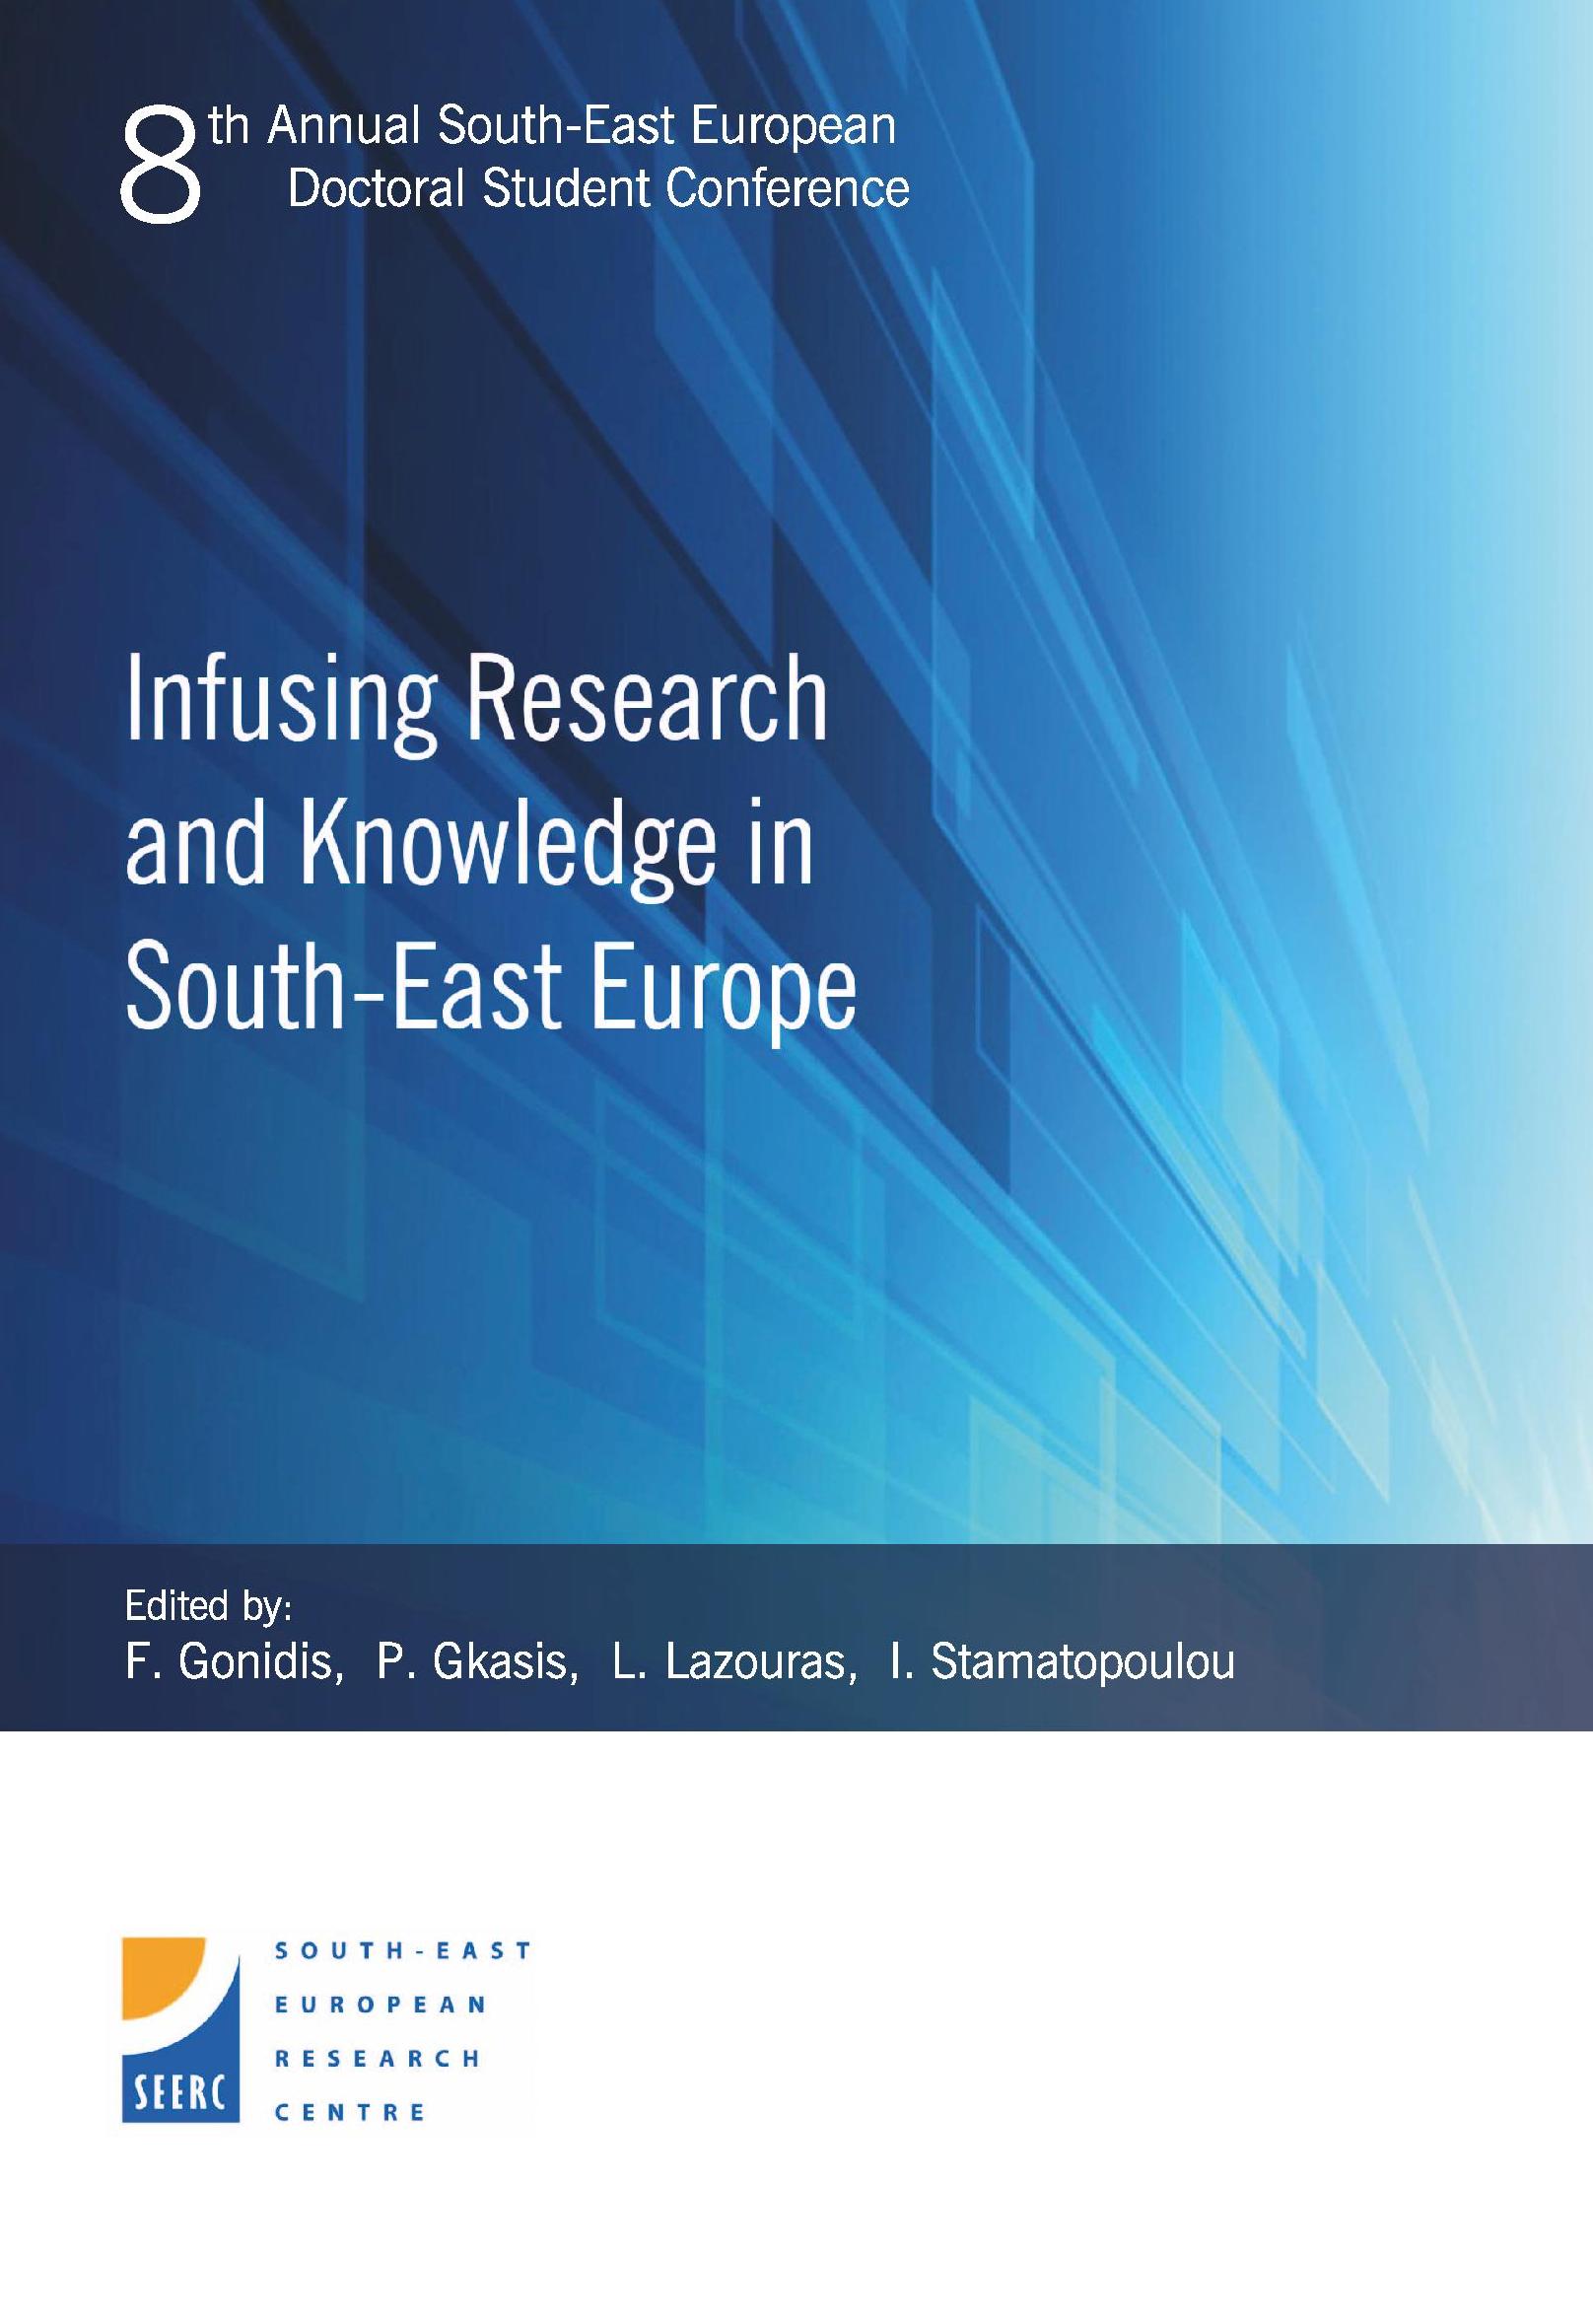 Proceedings of the 8th Annual South-East European Doctoral Student Conference: Infusing Research and Knowledge in South-East Europe